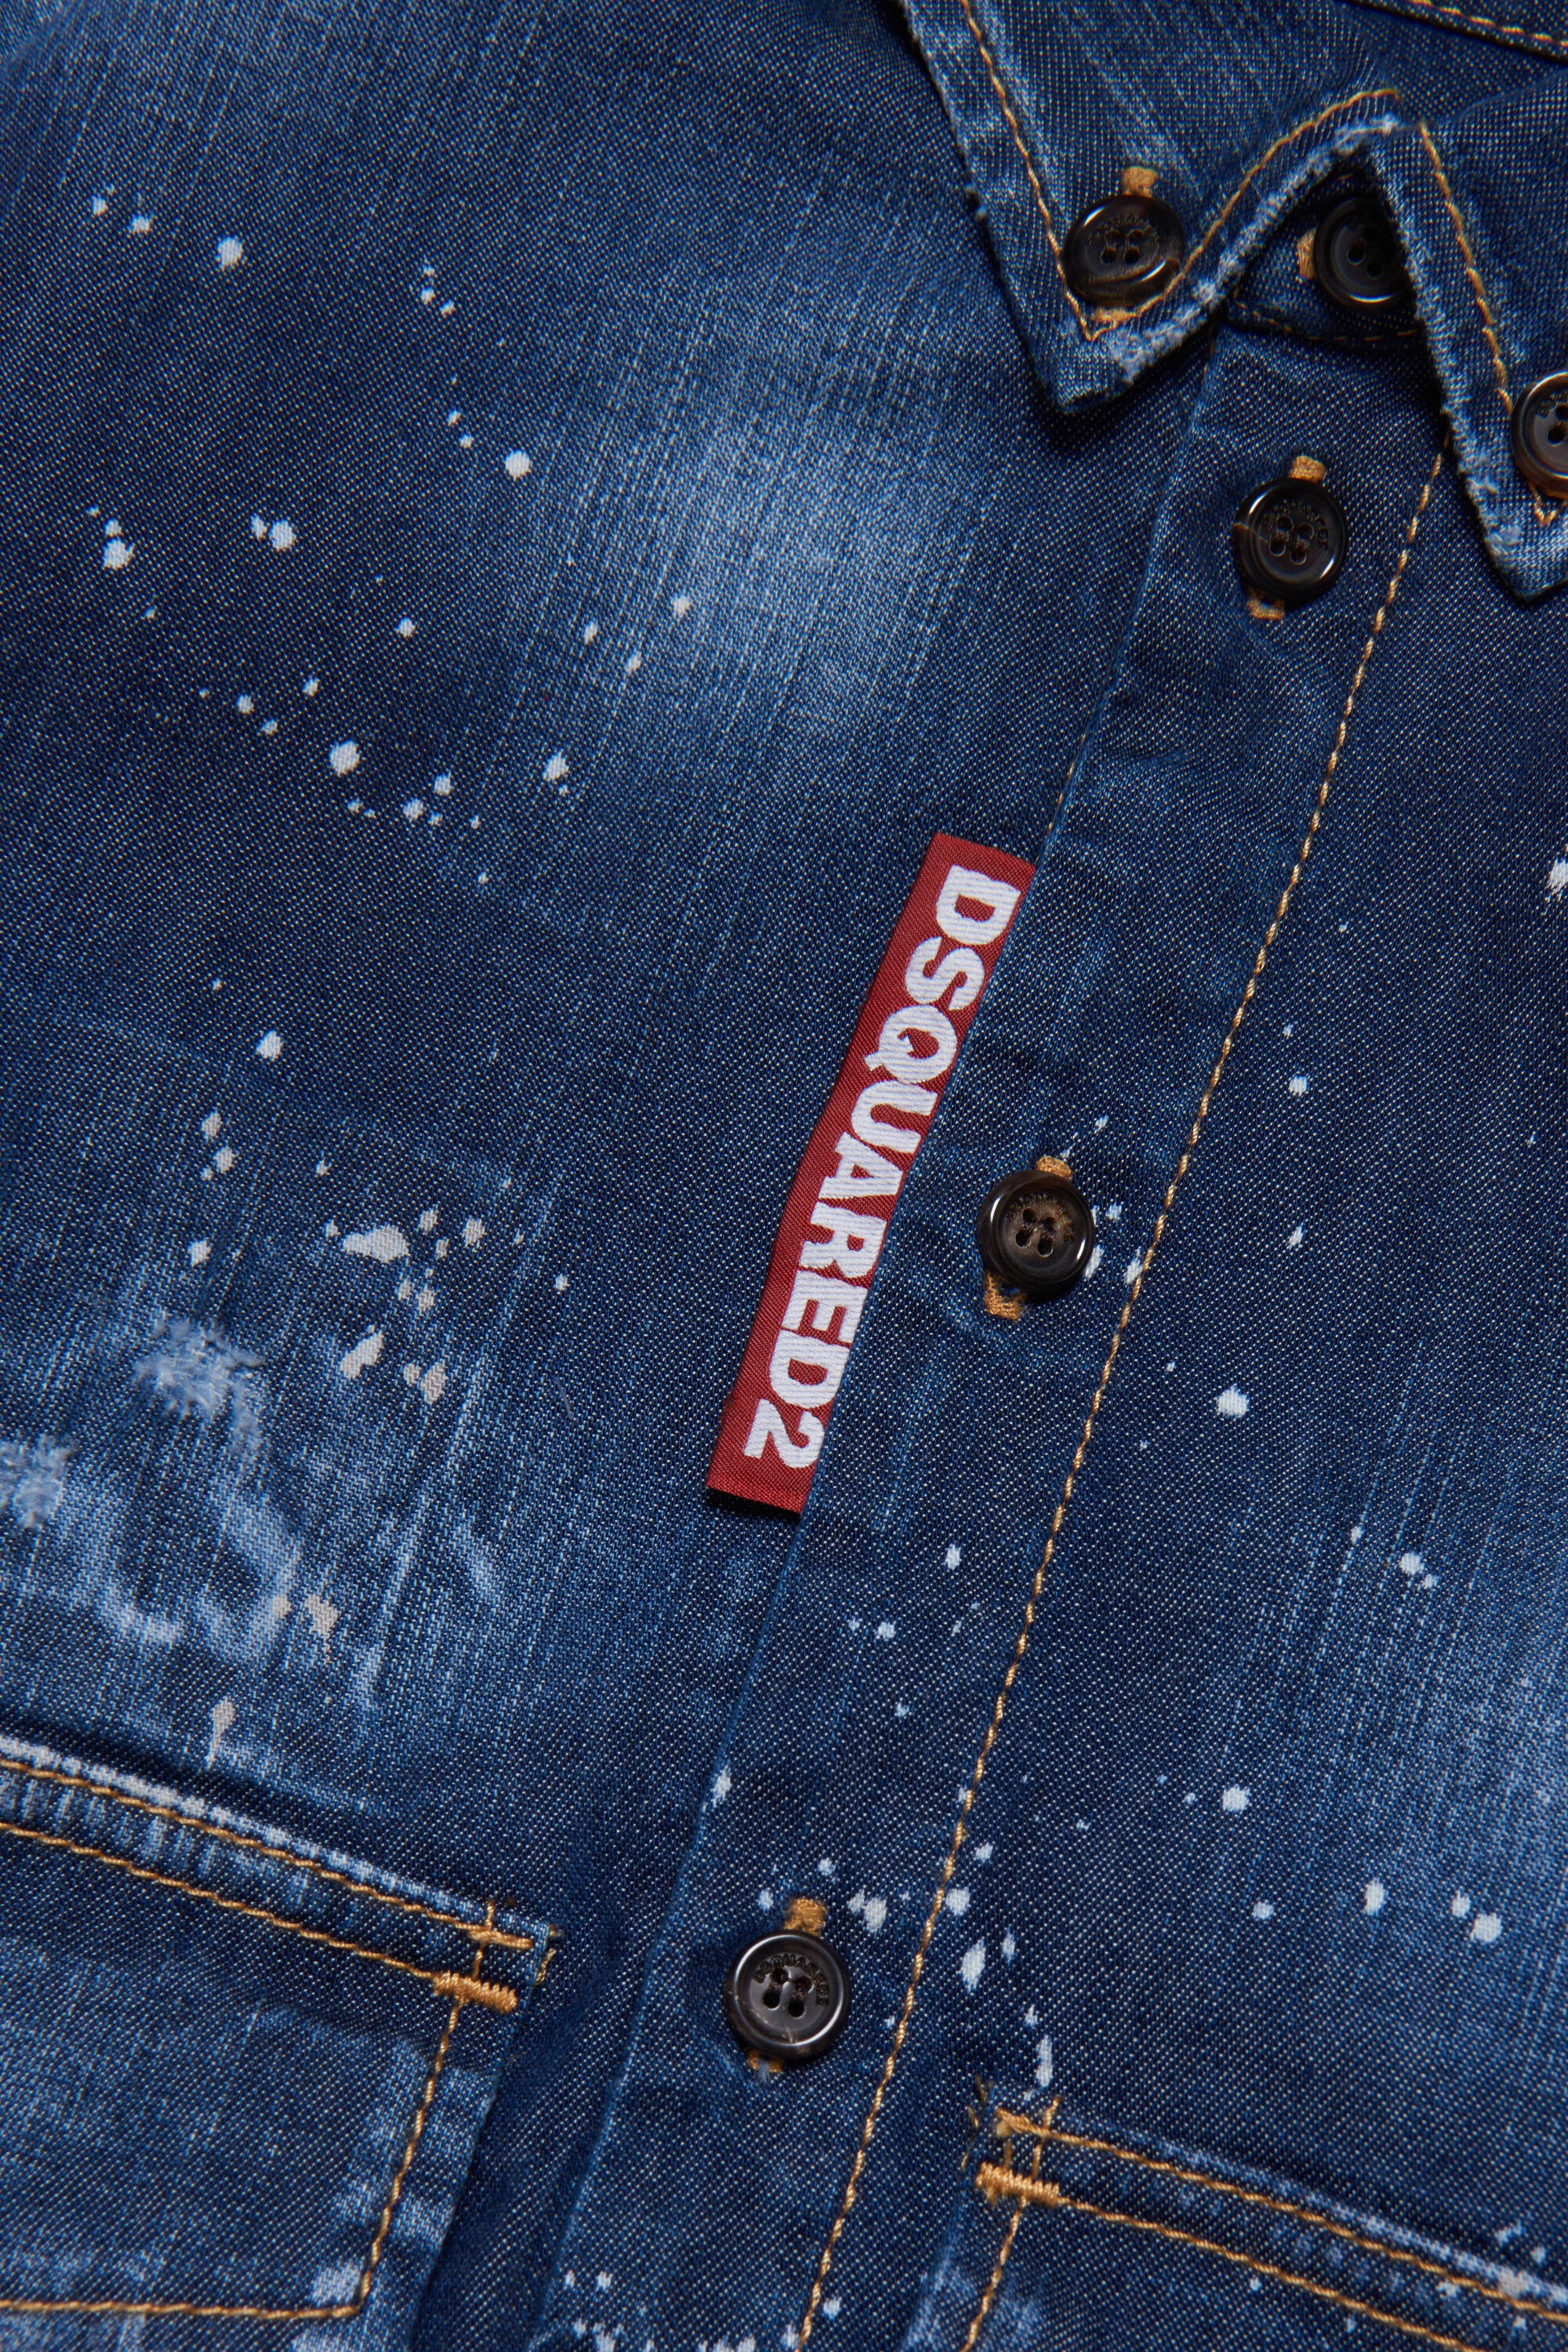 Shaded blue denim shirt with abrasions and stains